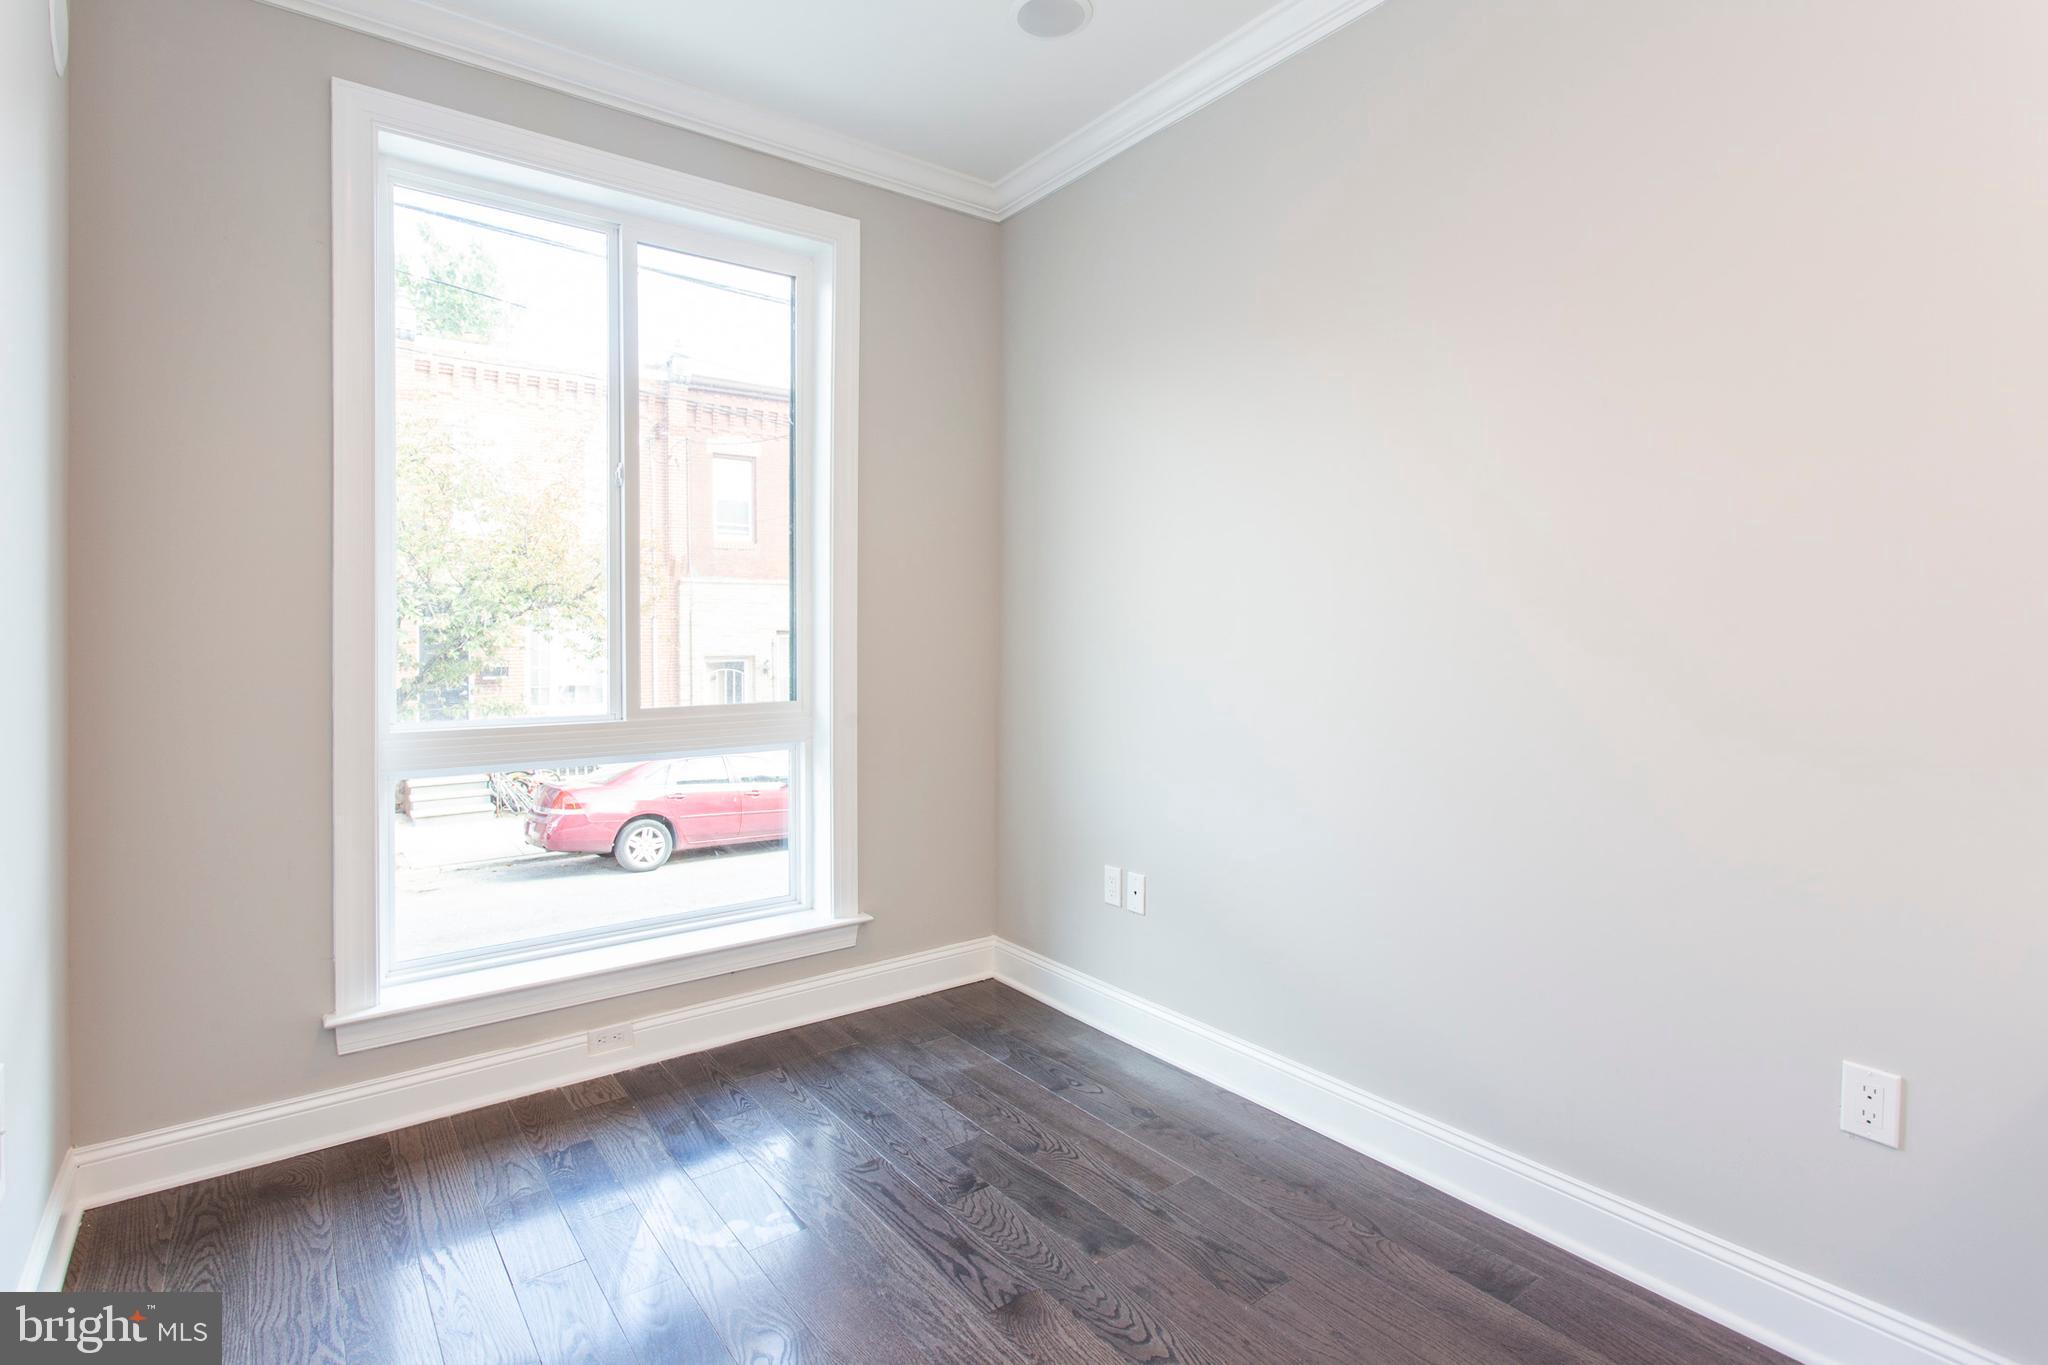 an empty room with wooden floor and window